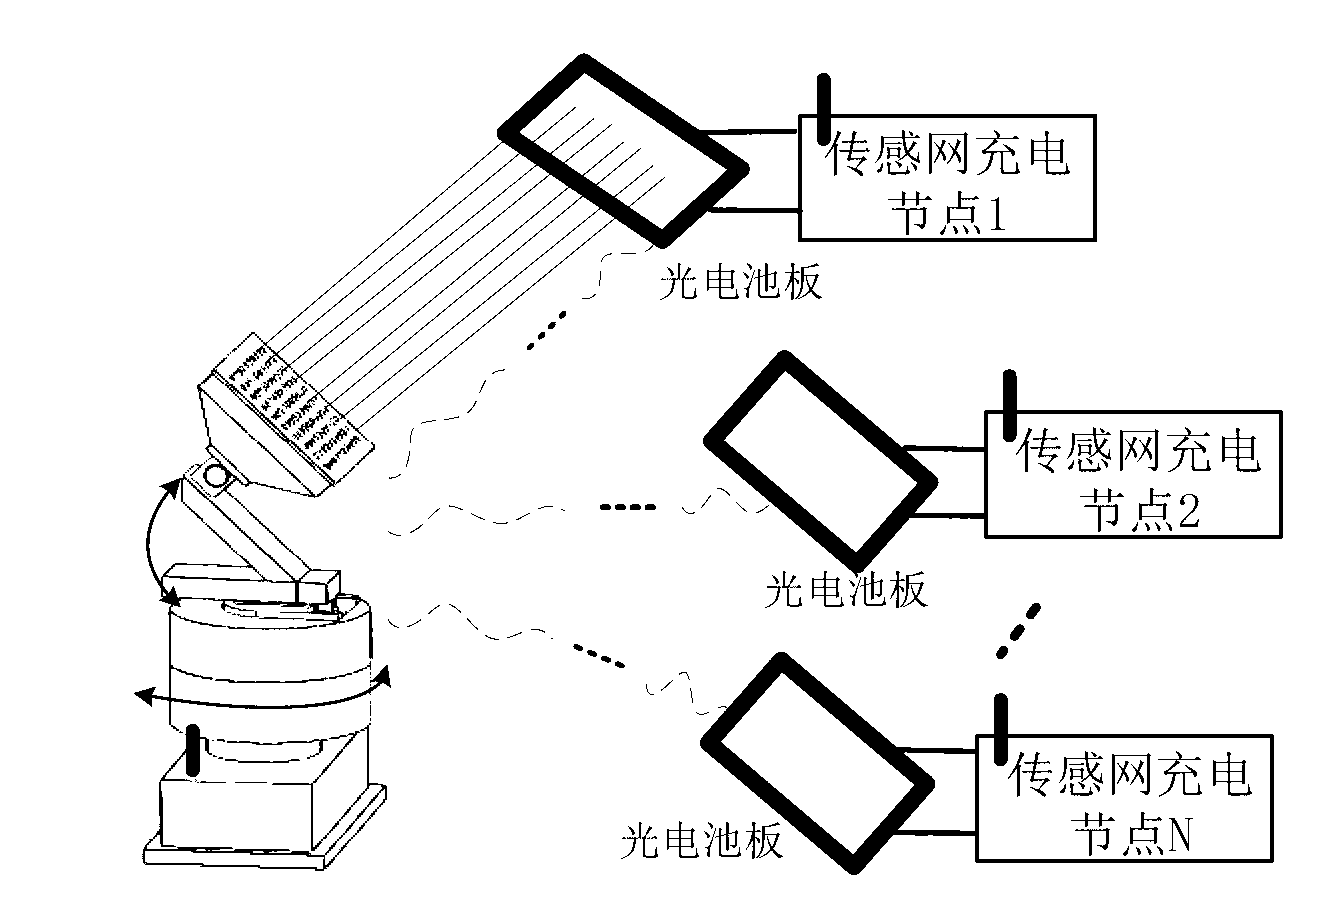 Sensor network long-distance charging and power supplying system based on laser light source